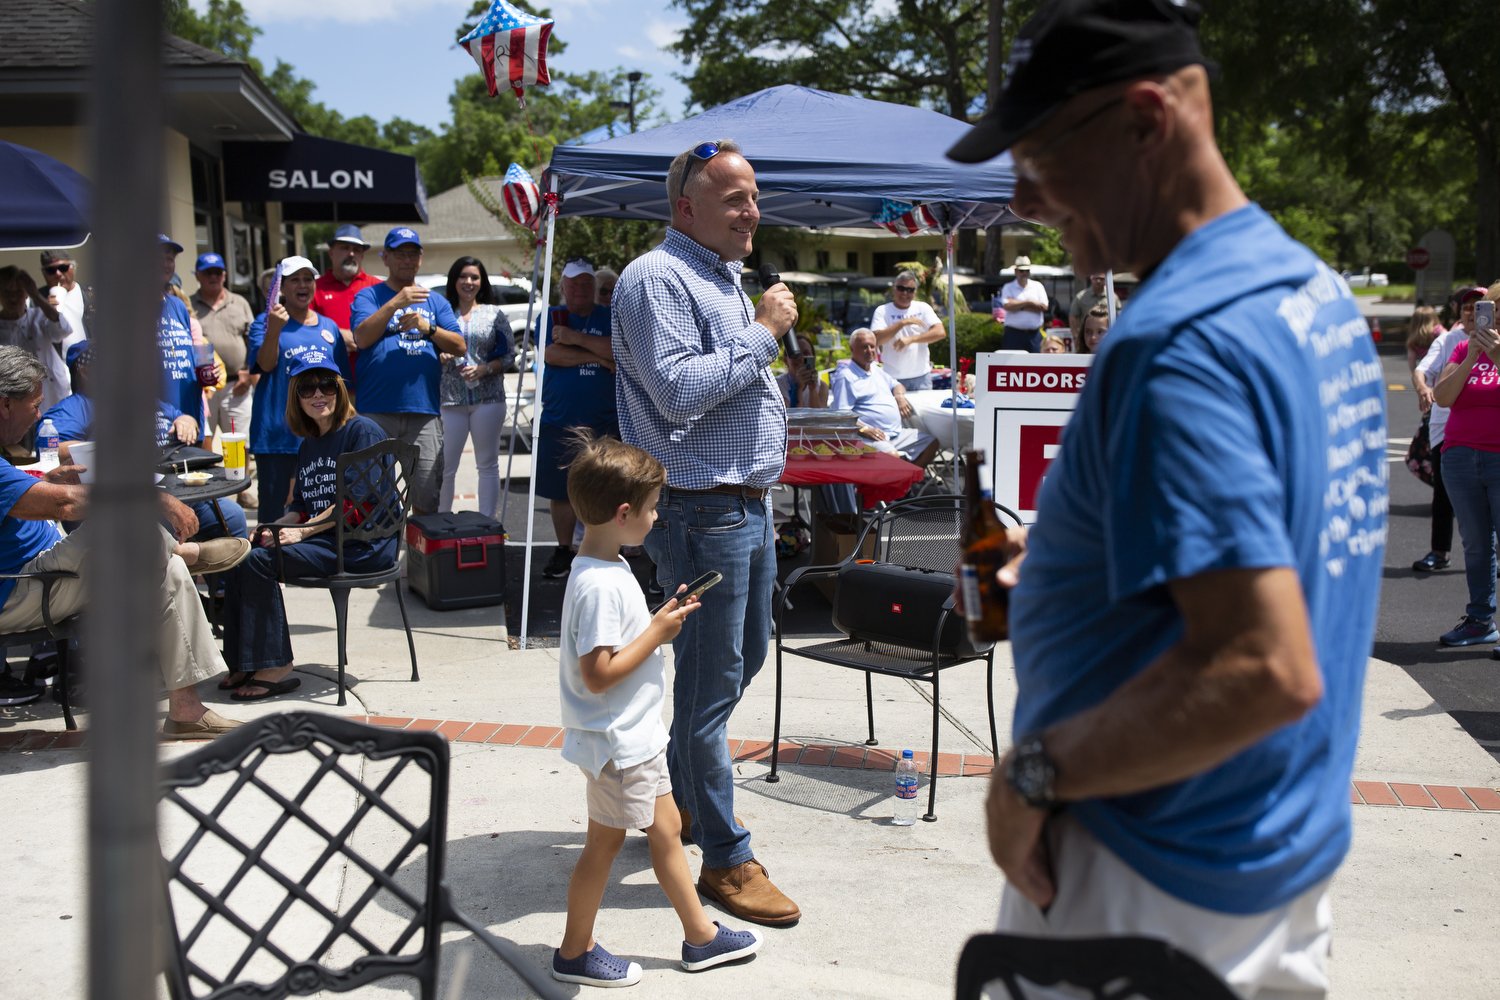  Congressional candidate Russell Fry addresses a crowd of supporters during a “Fry the Rice” campaign event at Cindy and Jim’s Ice Cream shop in Myrtle Beach, South Carolina. Fry, who was endorsed by former President Donald Trump, defeated challengin